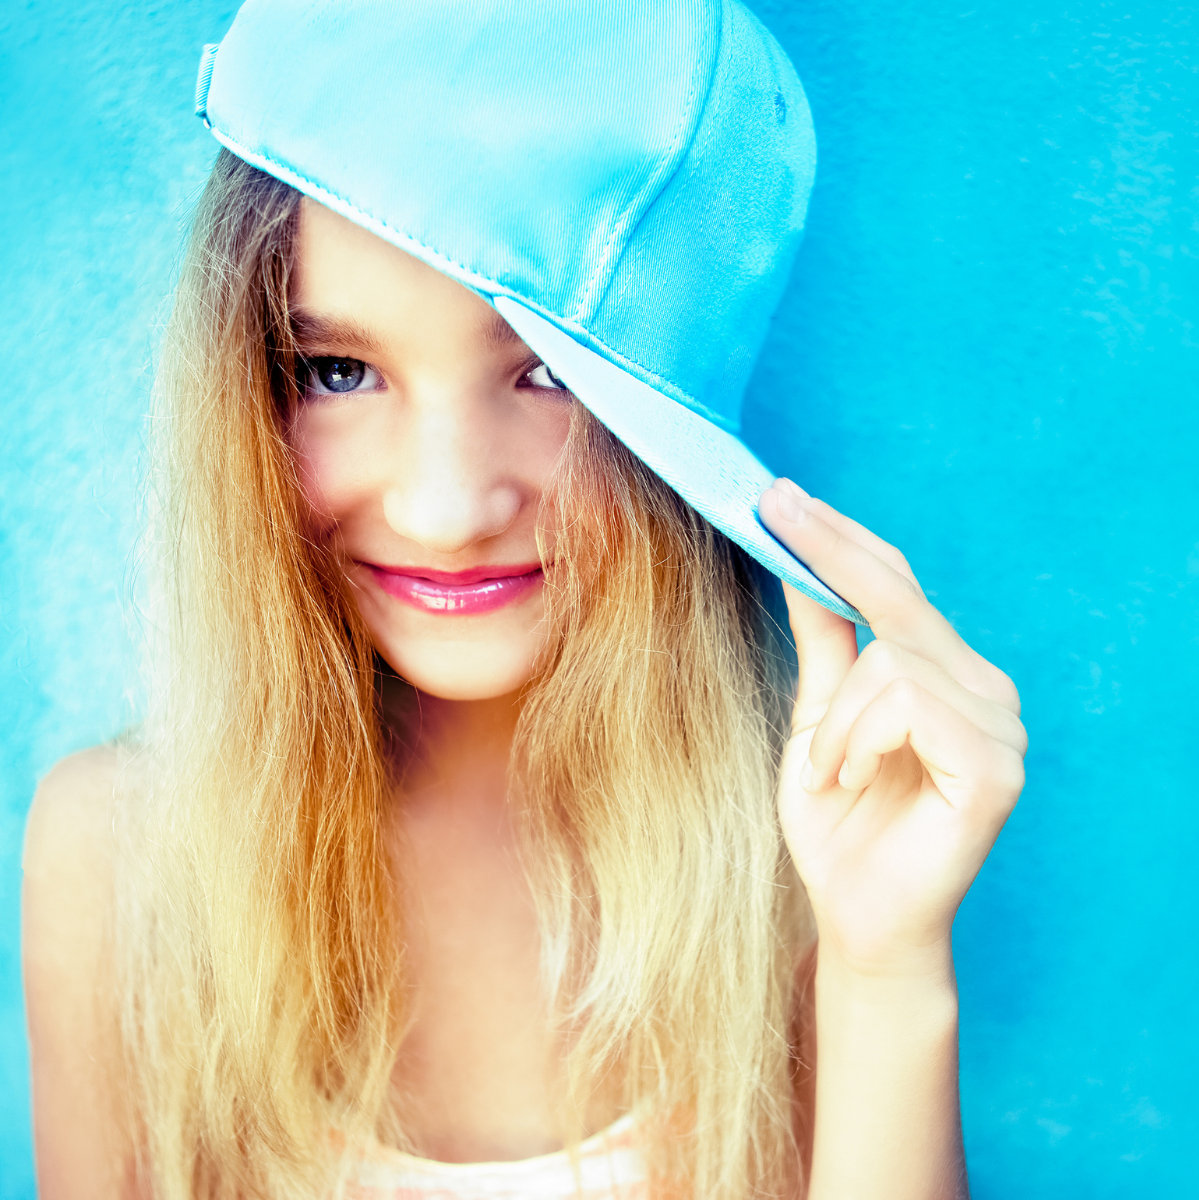 A tween or teen girl with light skin and hair wearing a light blue hat stands in front of a light blue wall and smiles knowing she is unique.